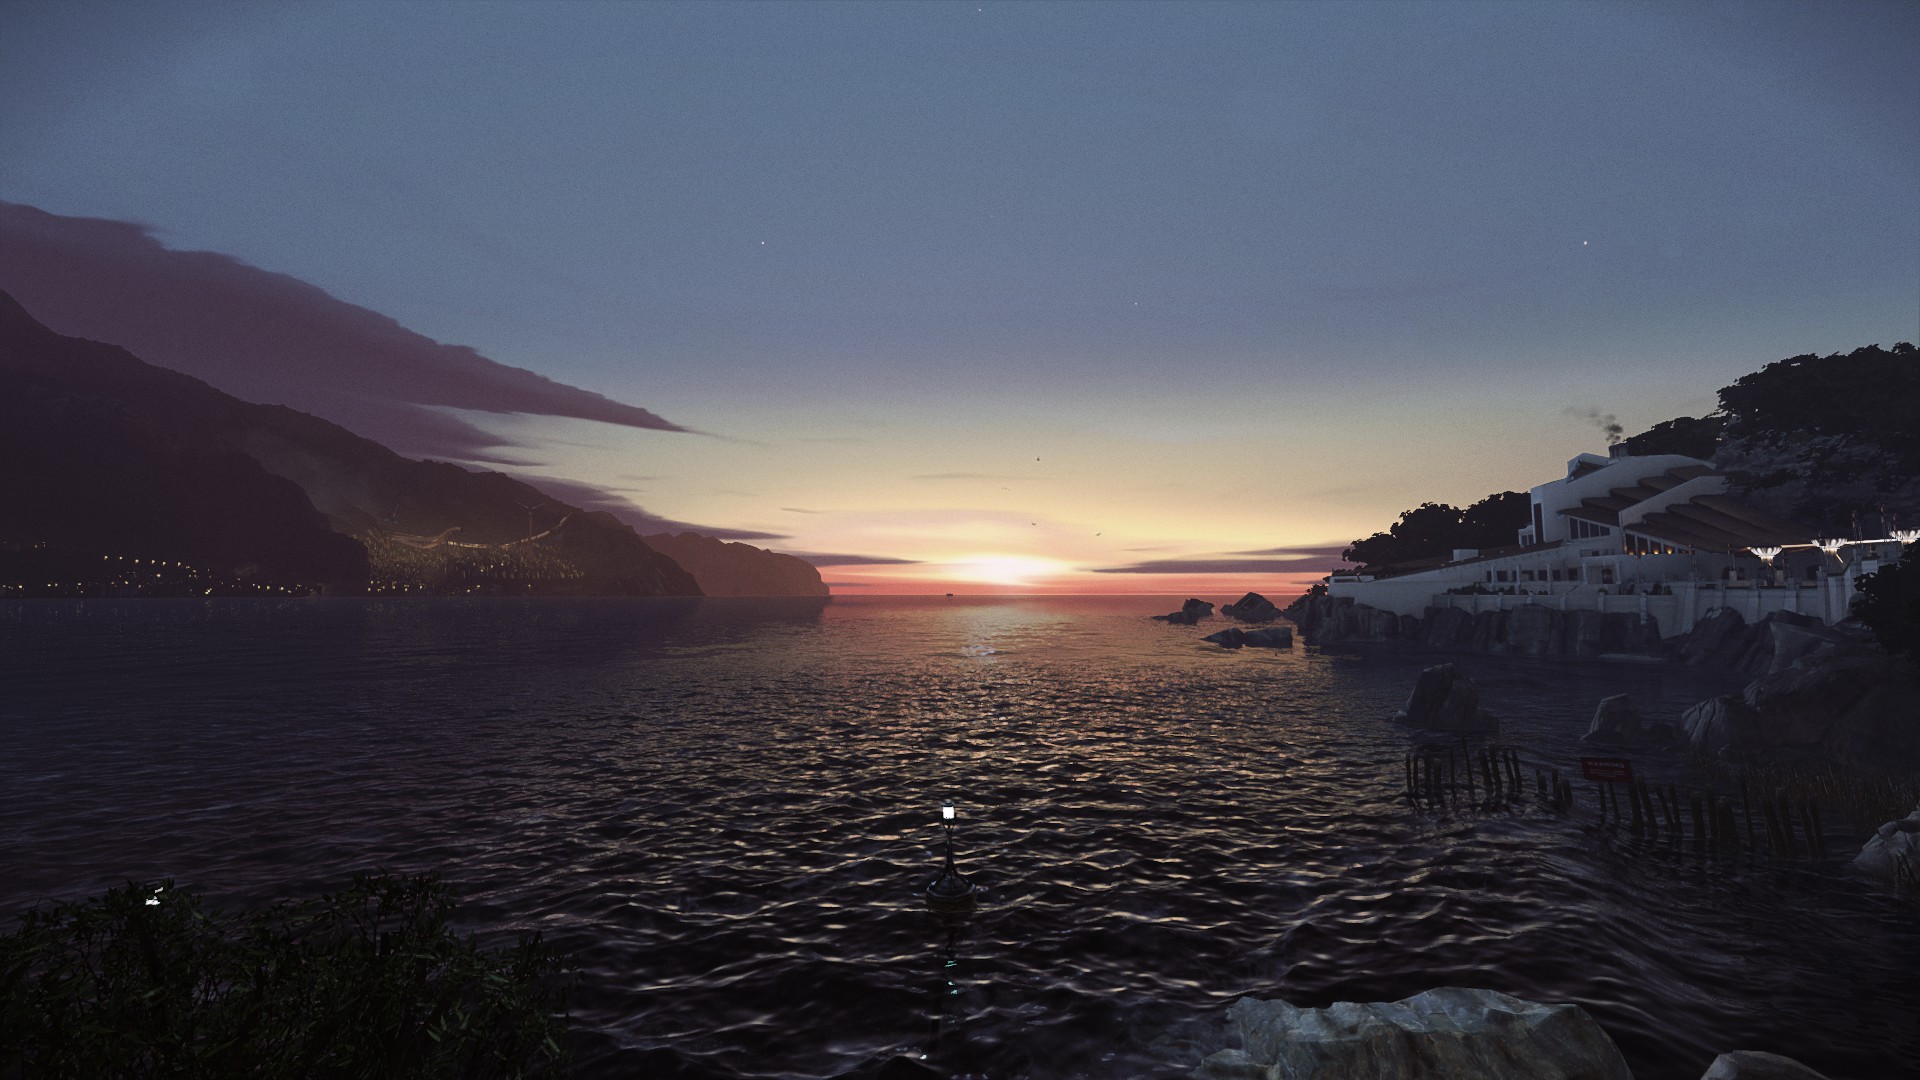 General 1920x1080 dishonored 2 screen shot video game art sunset